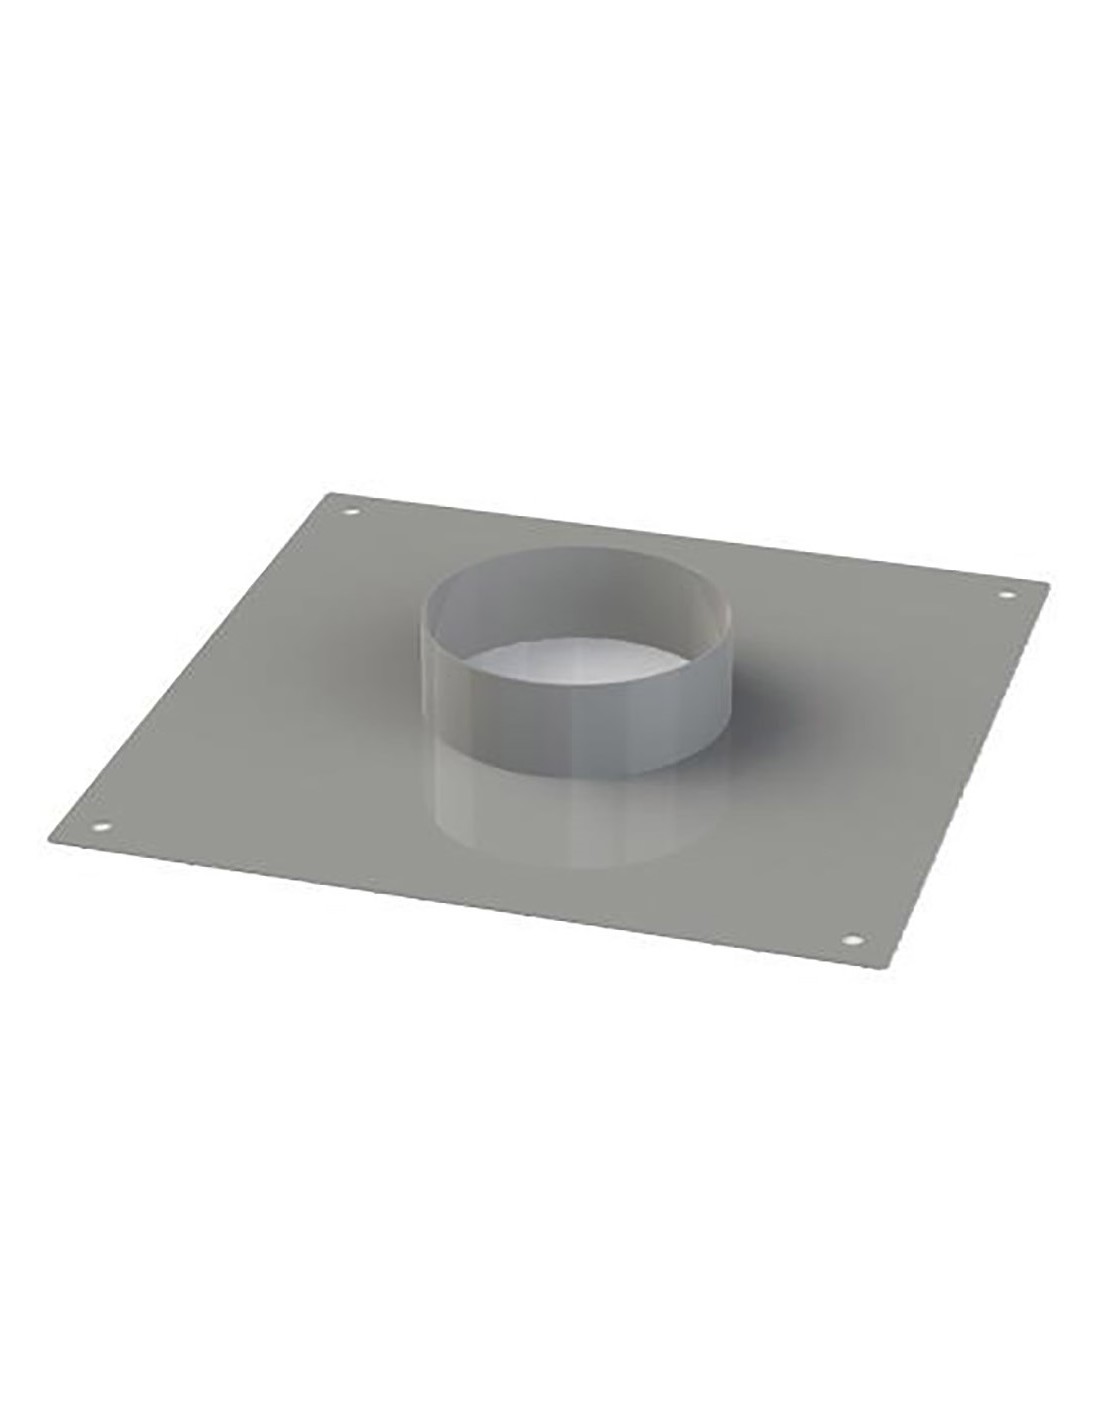 Collar plate for 40 x 60 outlet - Stainless steel - from Ø 12 to 30